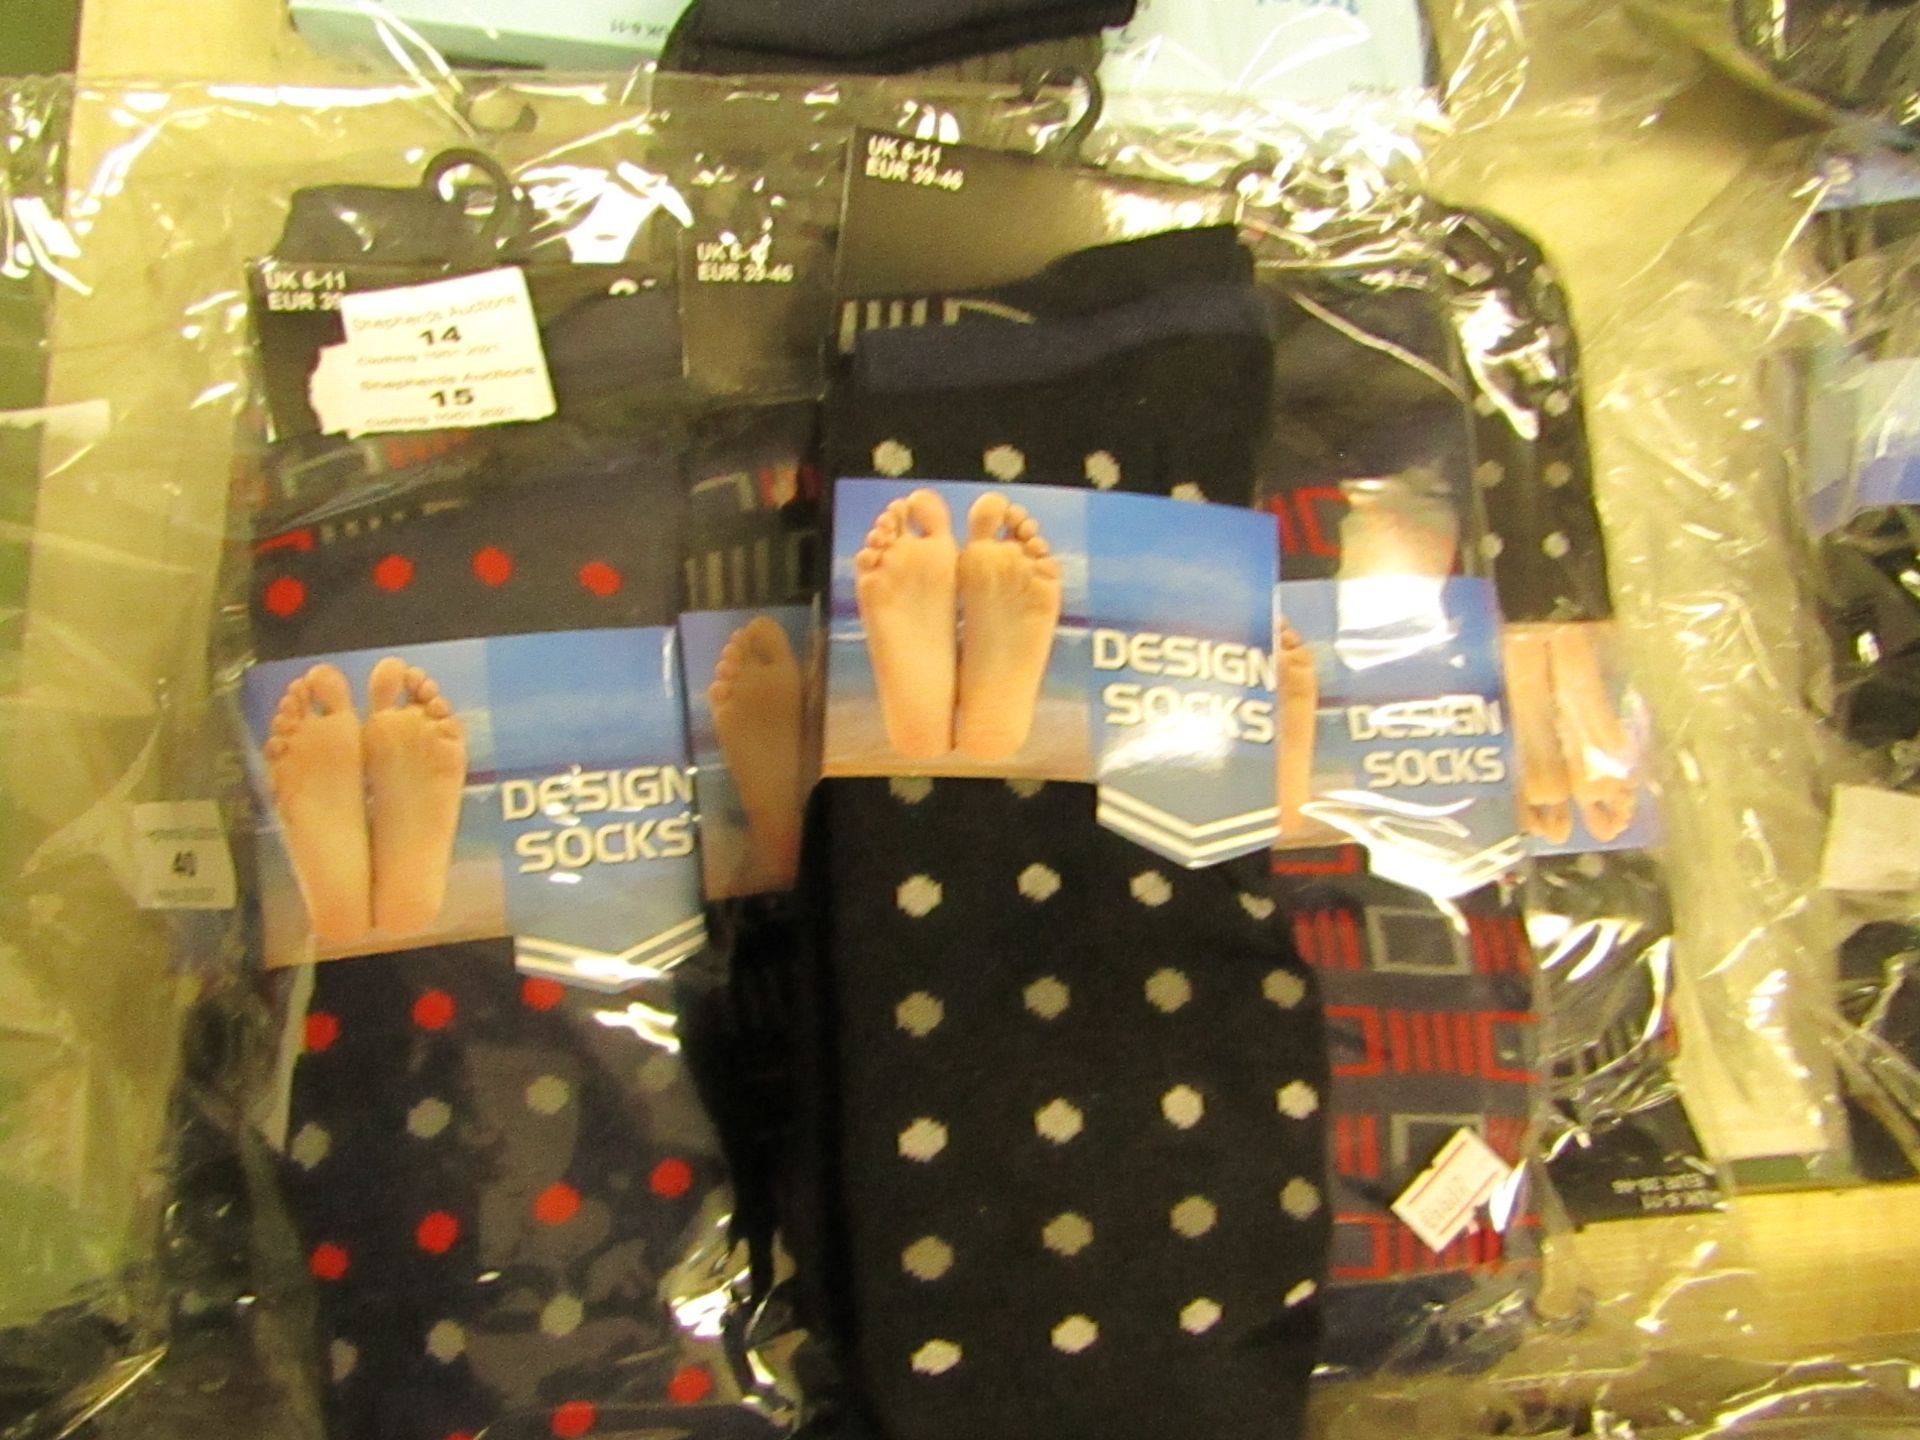 12 X Pairs of Mens Design Socks Size 6-11 New in Packaging